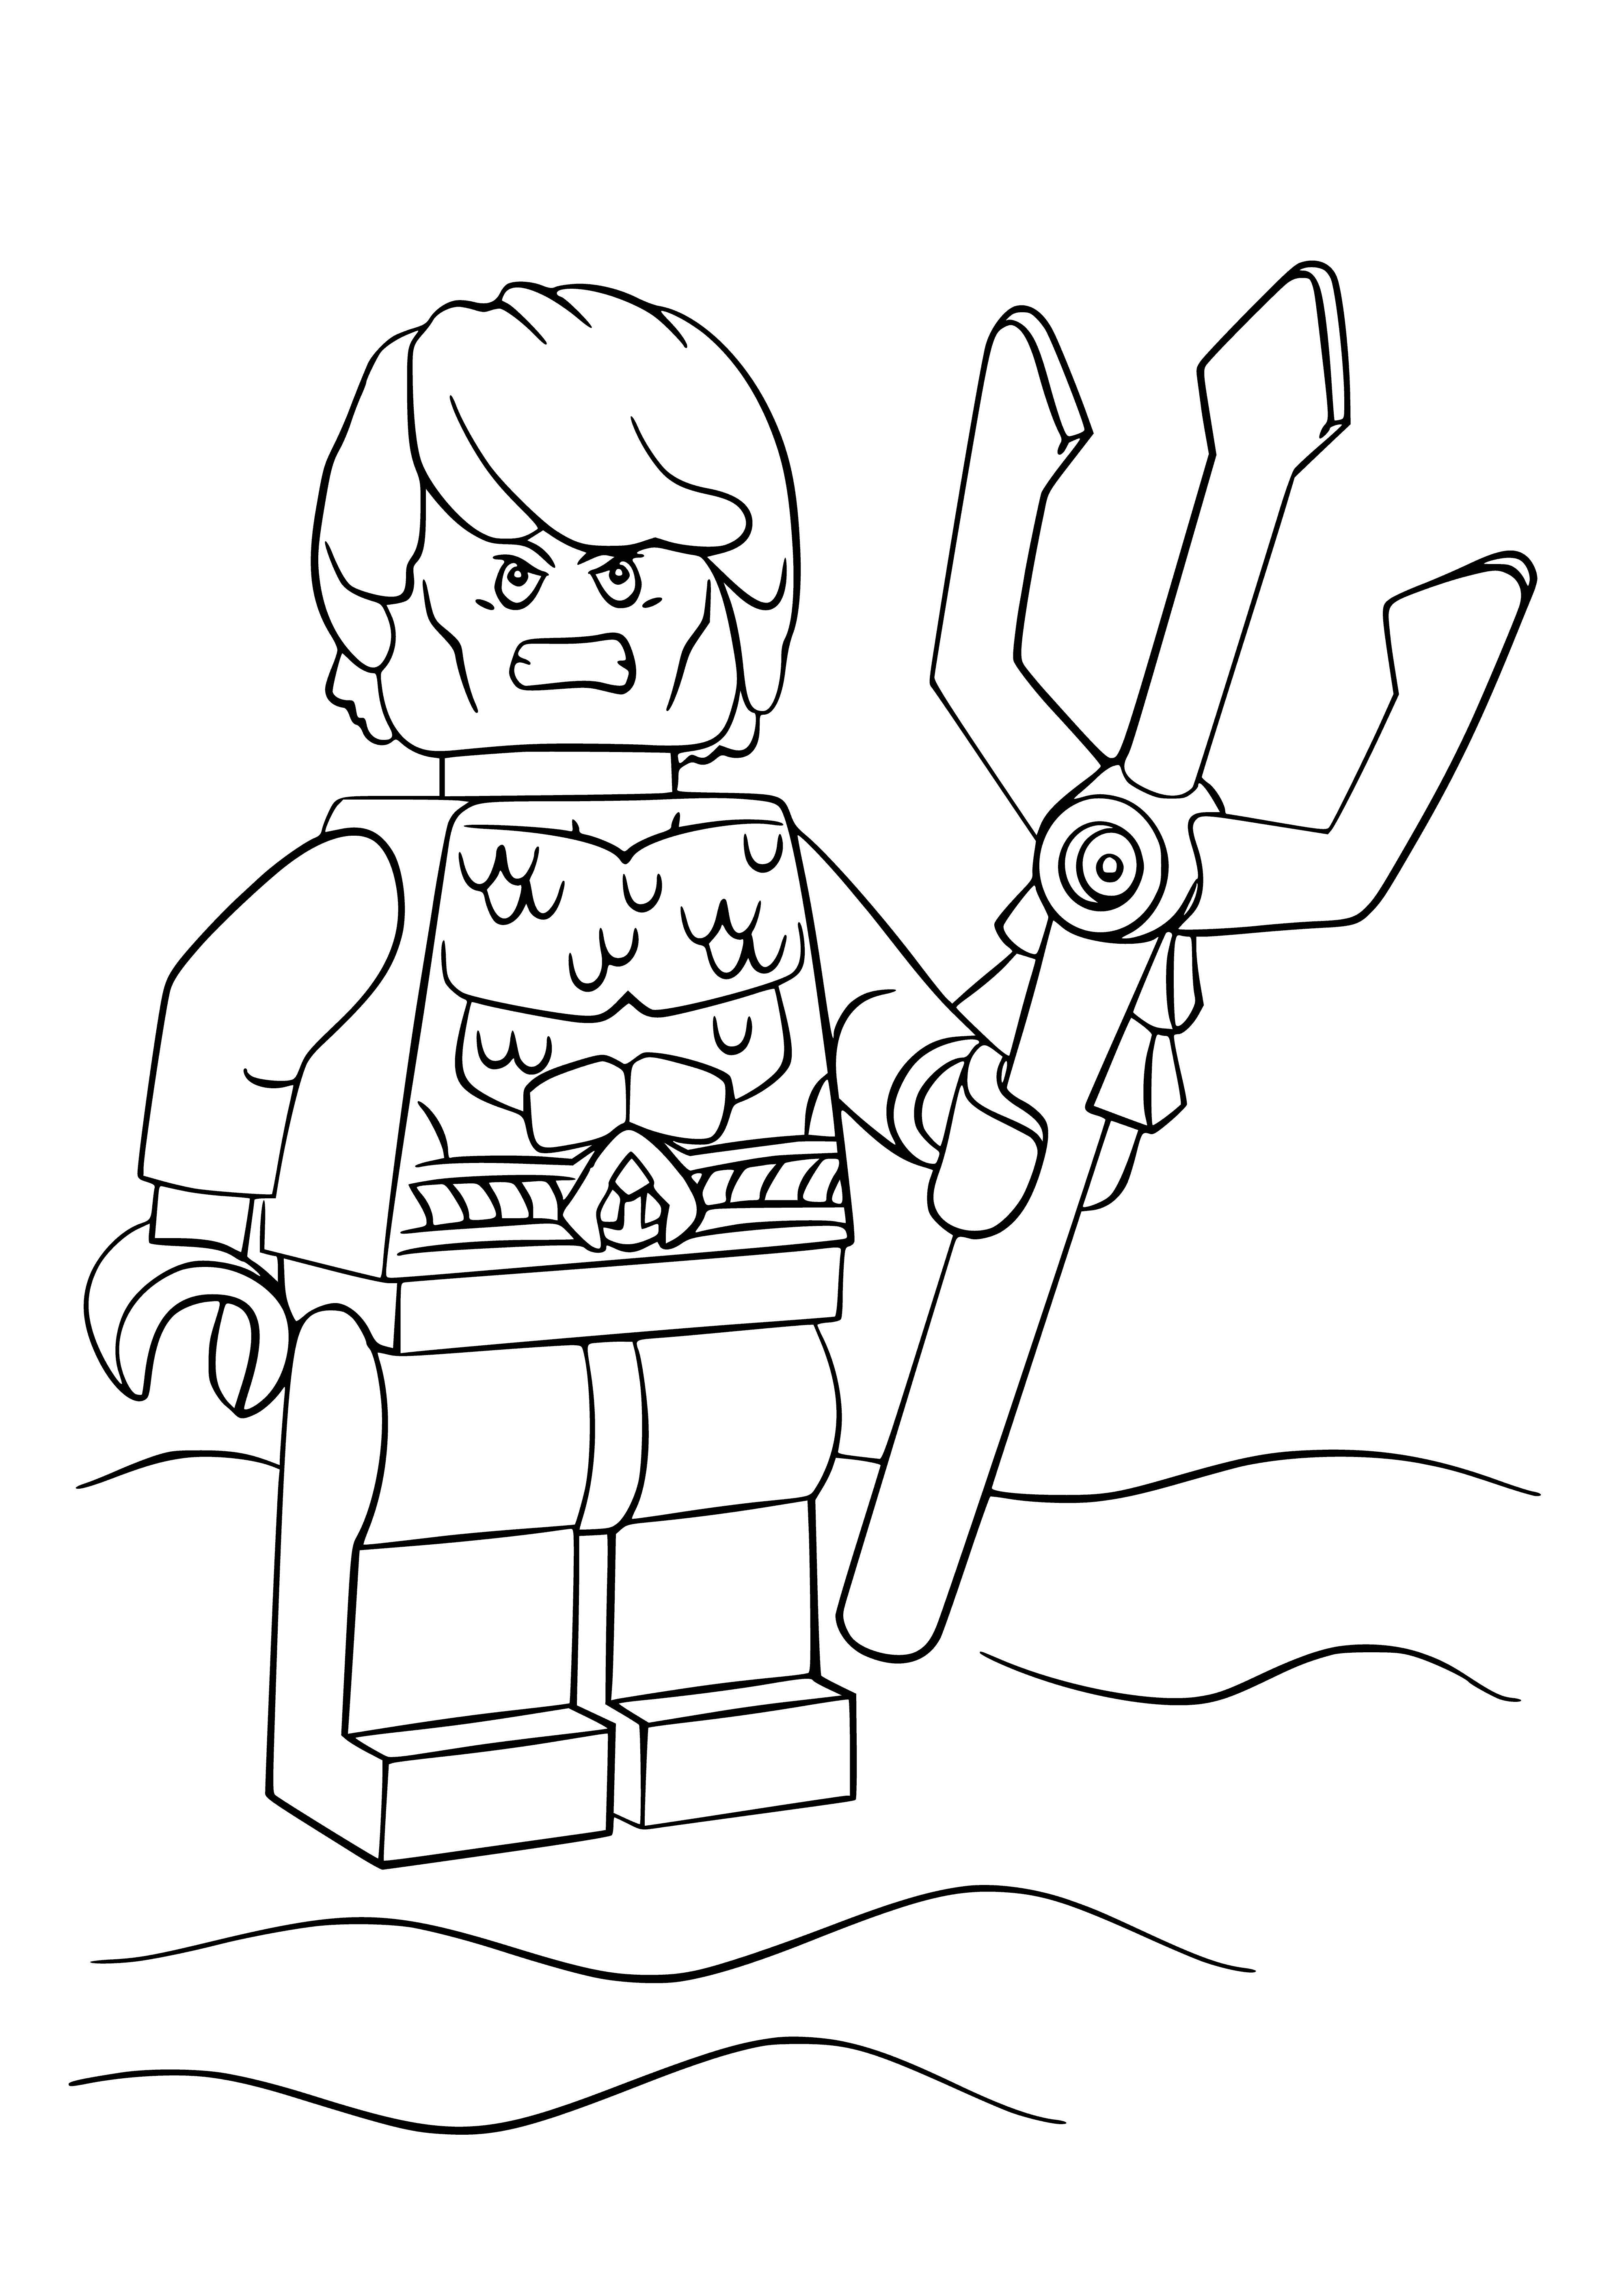 coloring page: Aquaman is a powerful Lego superhero and king of the seven seas with a trident and special abilities to fight and communicate with sea life.